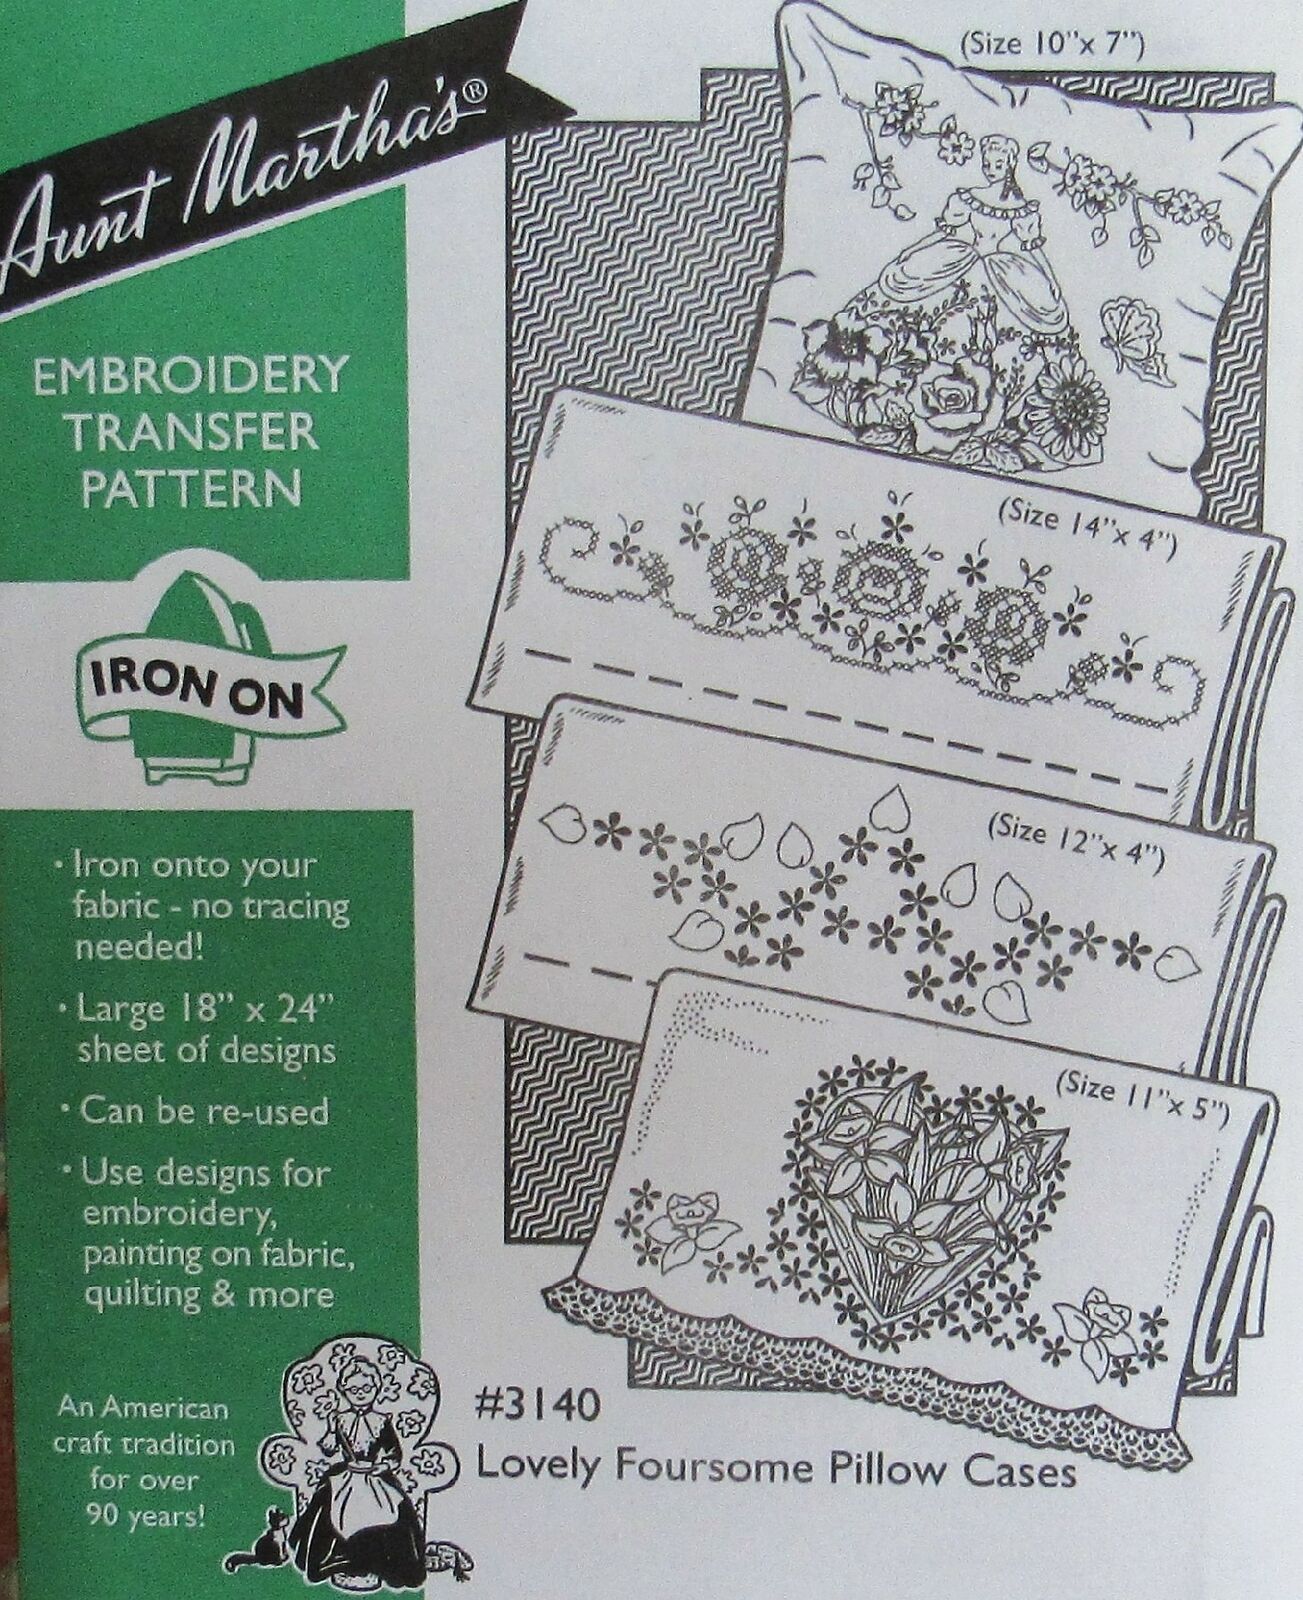 Aunt Martha's 3140 Flowers Southern Belle Pillowcase Embroidery Transfer Pattern